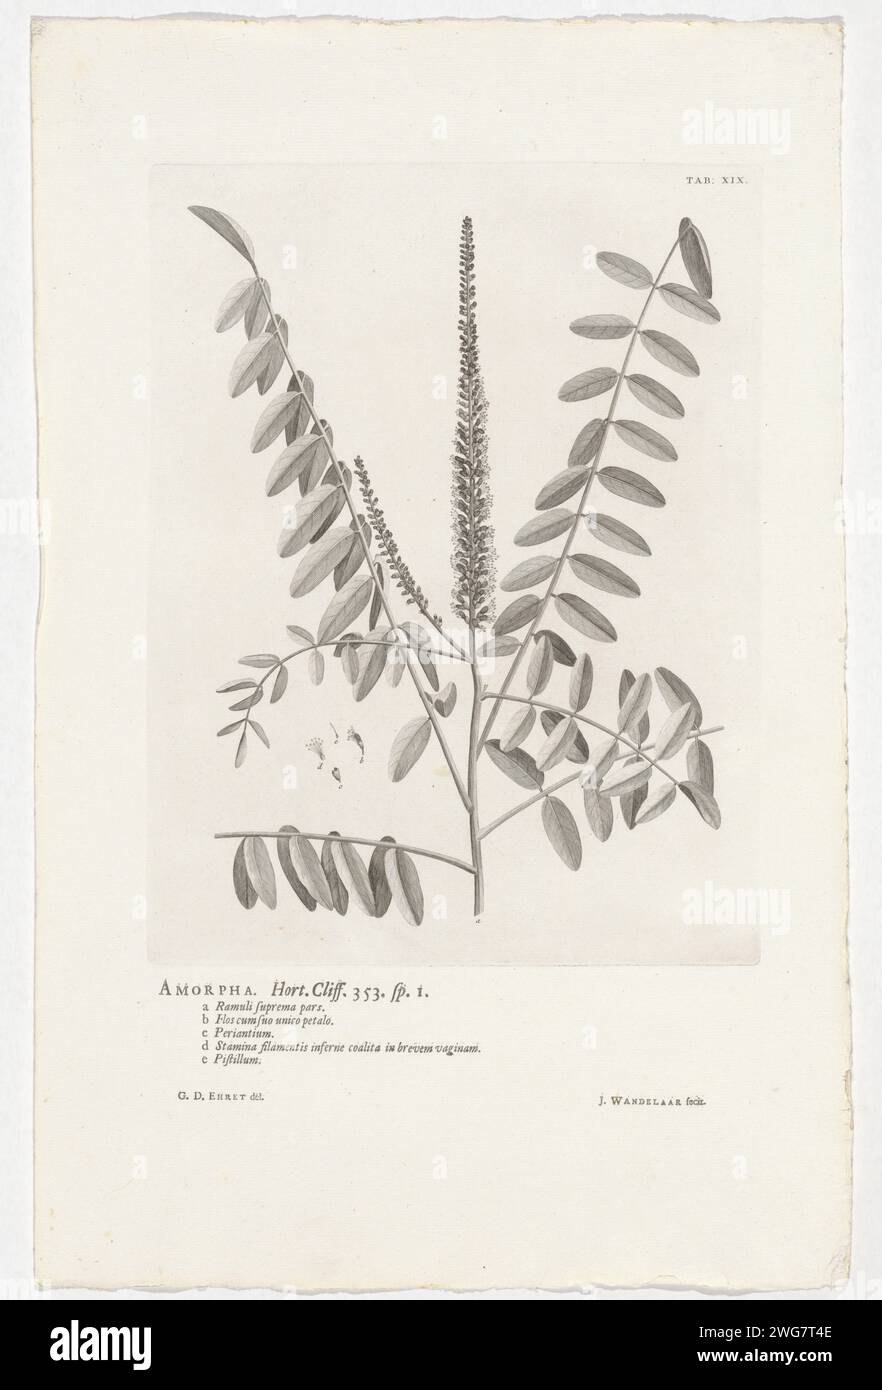 Amorpha Fruticosa, Jan Wandelaar, After Georg Dionys Ehret, 1738 print At the top right marked: tab: XIX. Warm paper etching / letterpress printing plants and herbs. flowers Stock Photo